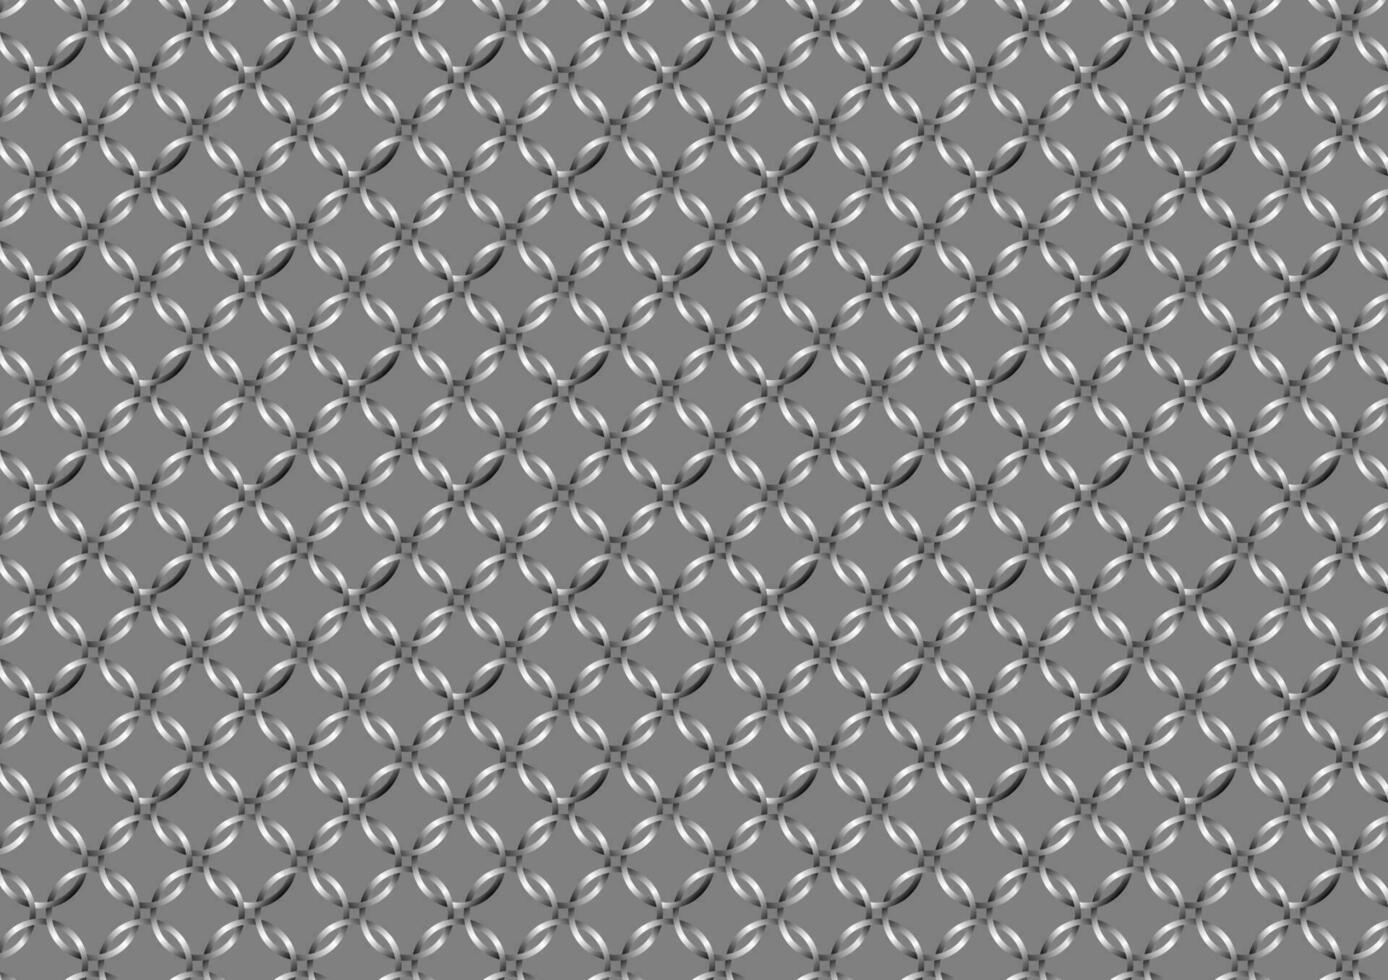 Chain grey metal silver net industry wallpaper circle pattern background vector